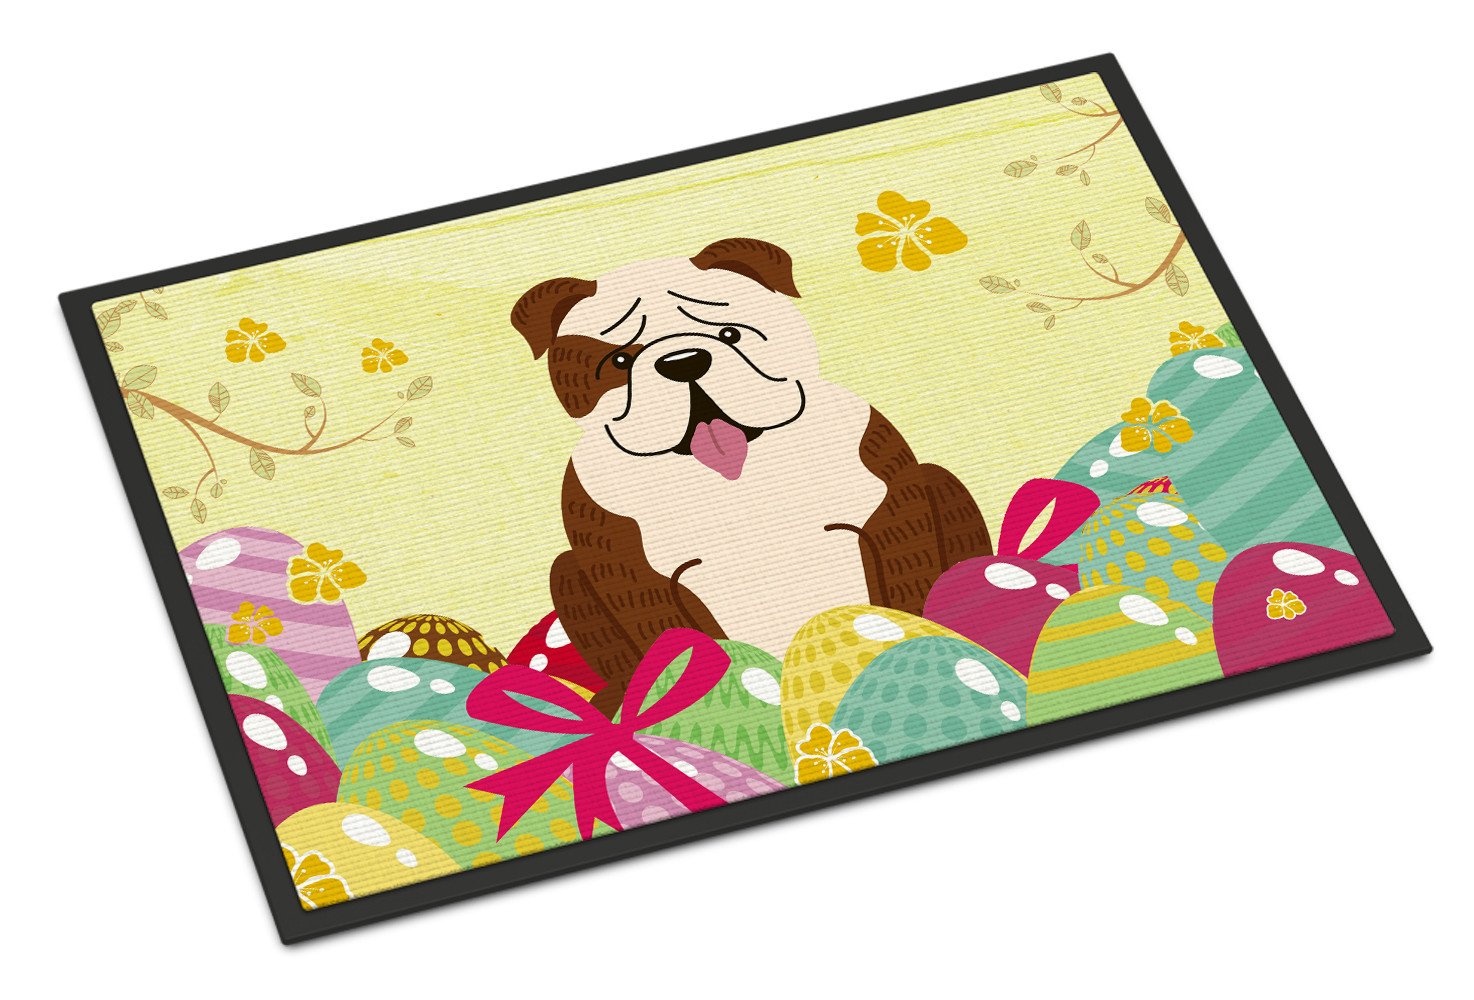 Easter Eggs English Bulldog Brindle White Indoor or Outdoor Mat 24x36 BB6121JMAT by Caroline's Treasures